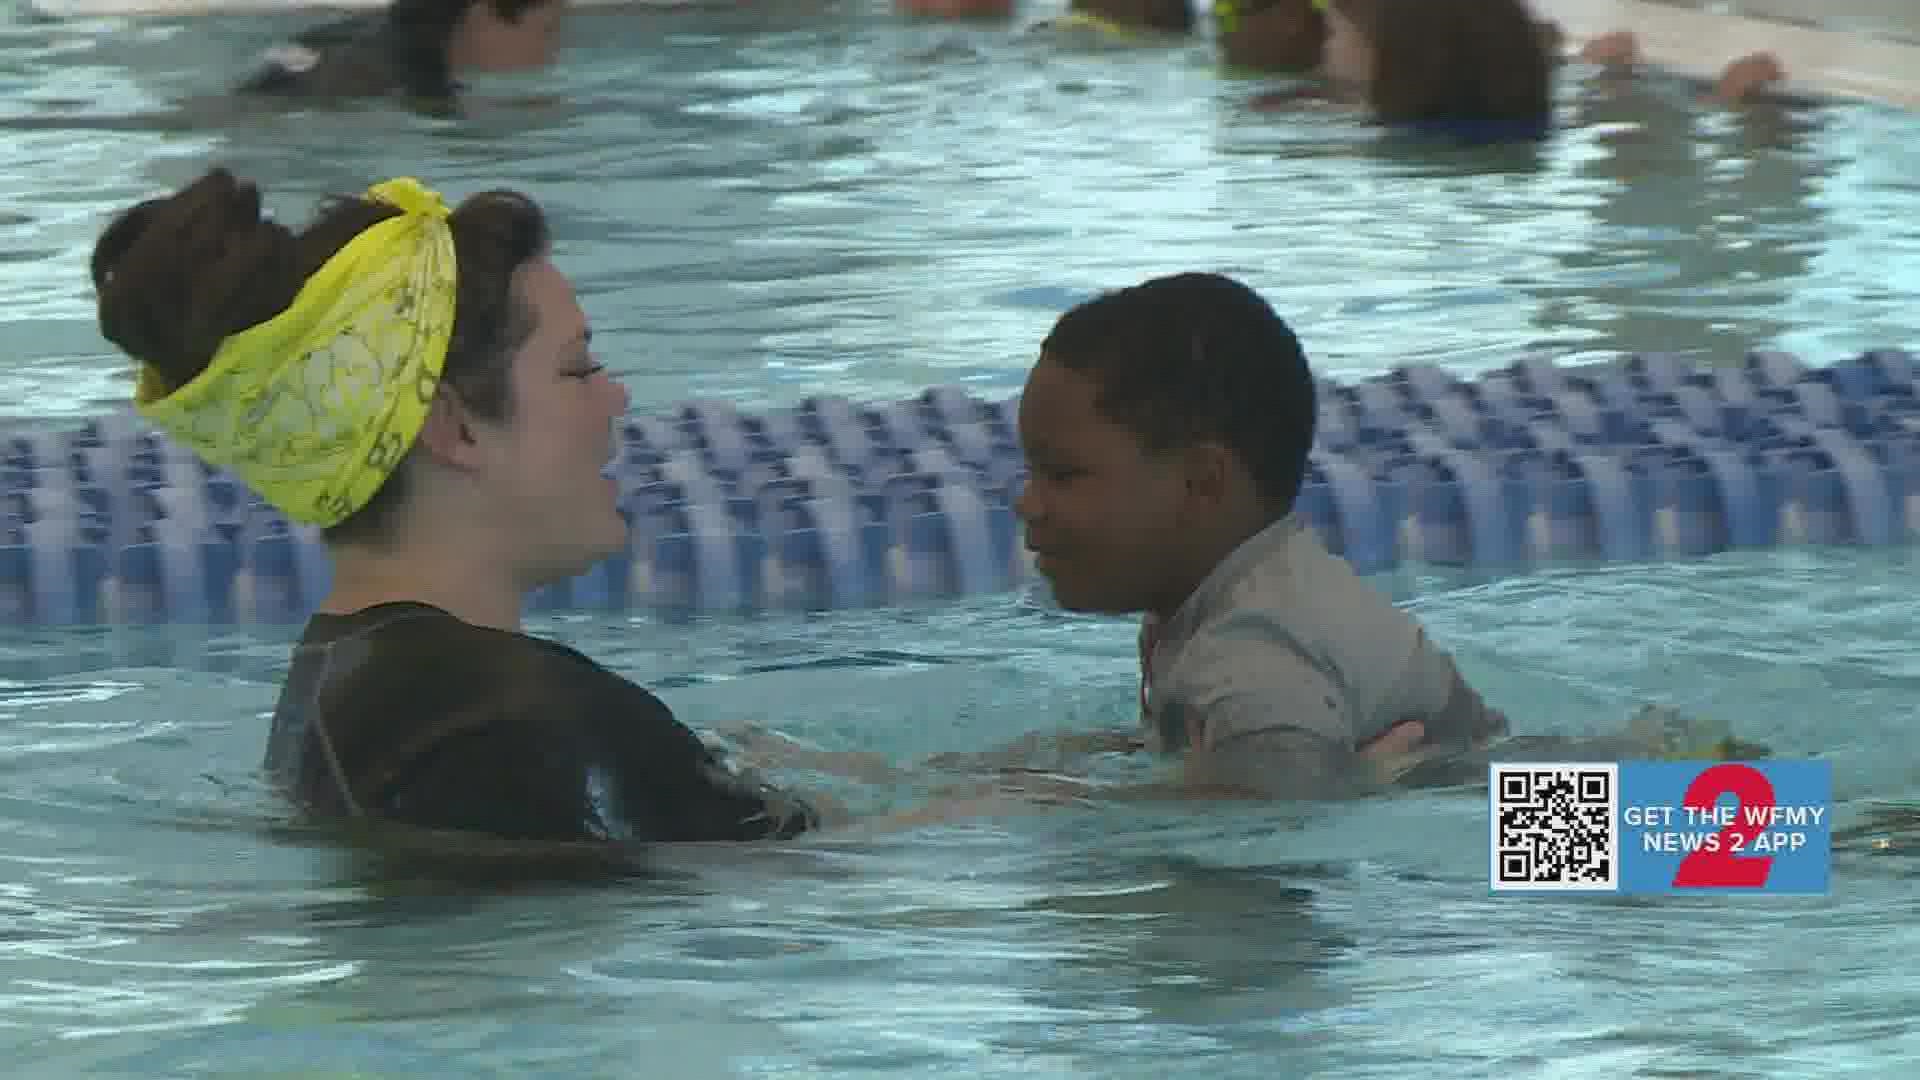 The global drowning prevention event works to get more kids in the pool and learning swim safety.